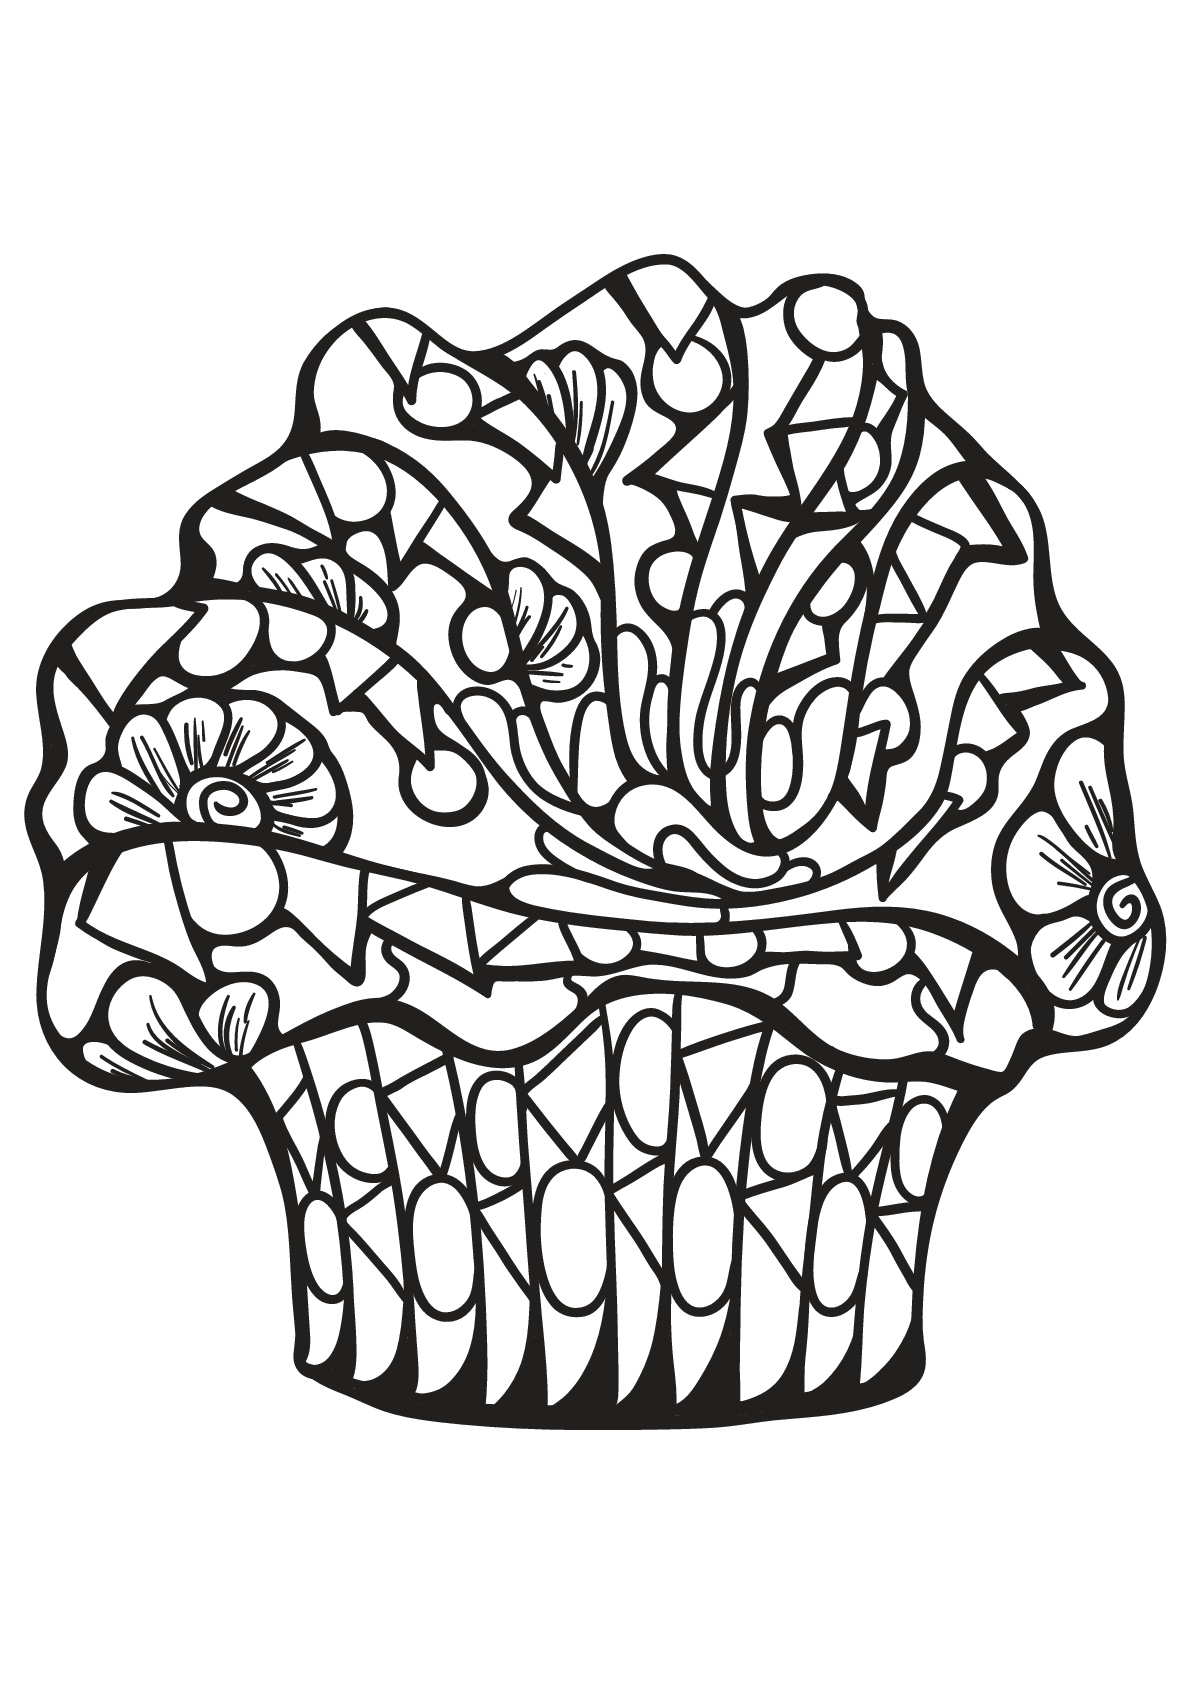 Free book cupcake 7 - Cupcakes Adult Coloring Pages